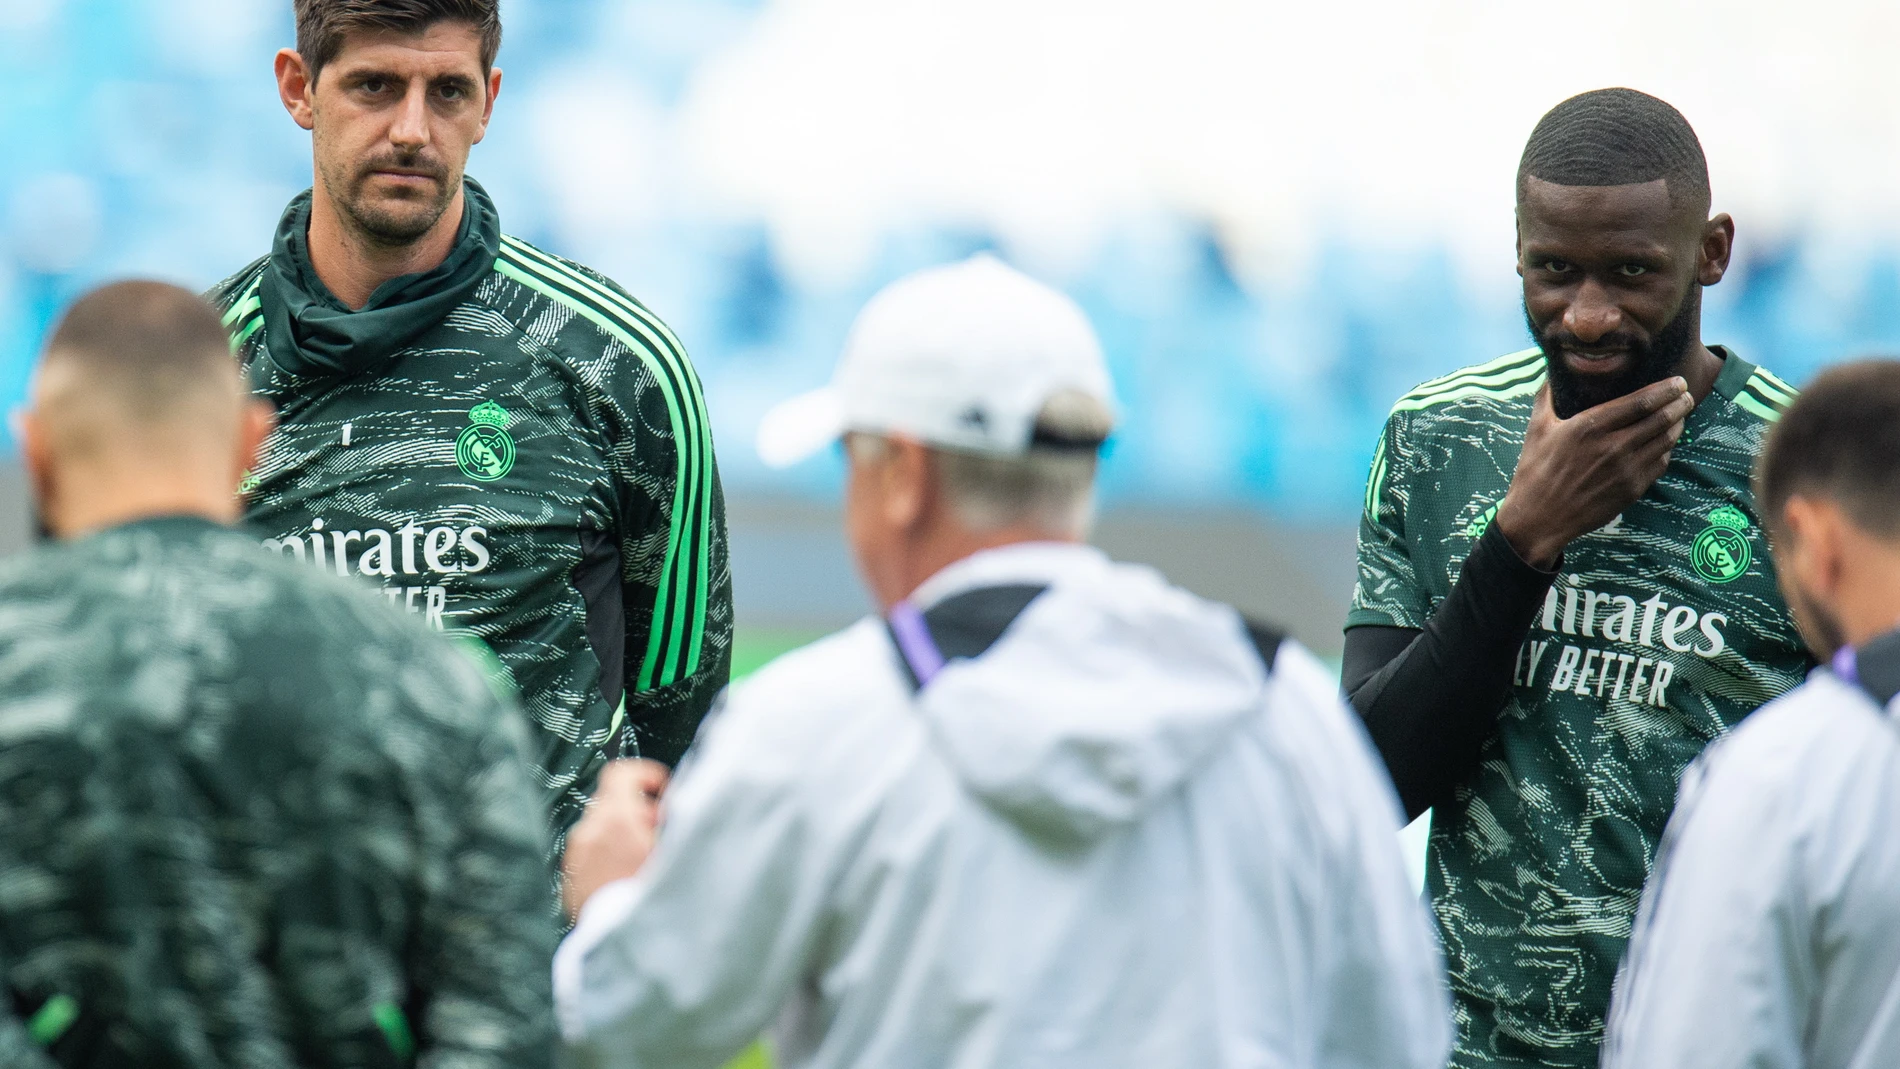 Manchester (United Kingdom), 16/05/2023.- Real Madrid's defender Antonio Rudiger (R) and goalkeeperThibaut Courtois (L) attend a training session held at the Etihad Stadium, Manchester, Britain, 16 May 2023. Real Madrid face Manchester City in a UEFA Champions League semi-finals, 2nd leg soccer match on 17 May. (Liga de Campeones, Reino Unido) EFE/EPA/PETER POWELL 